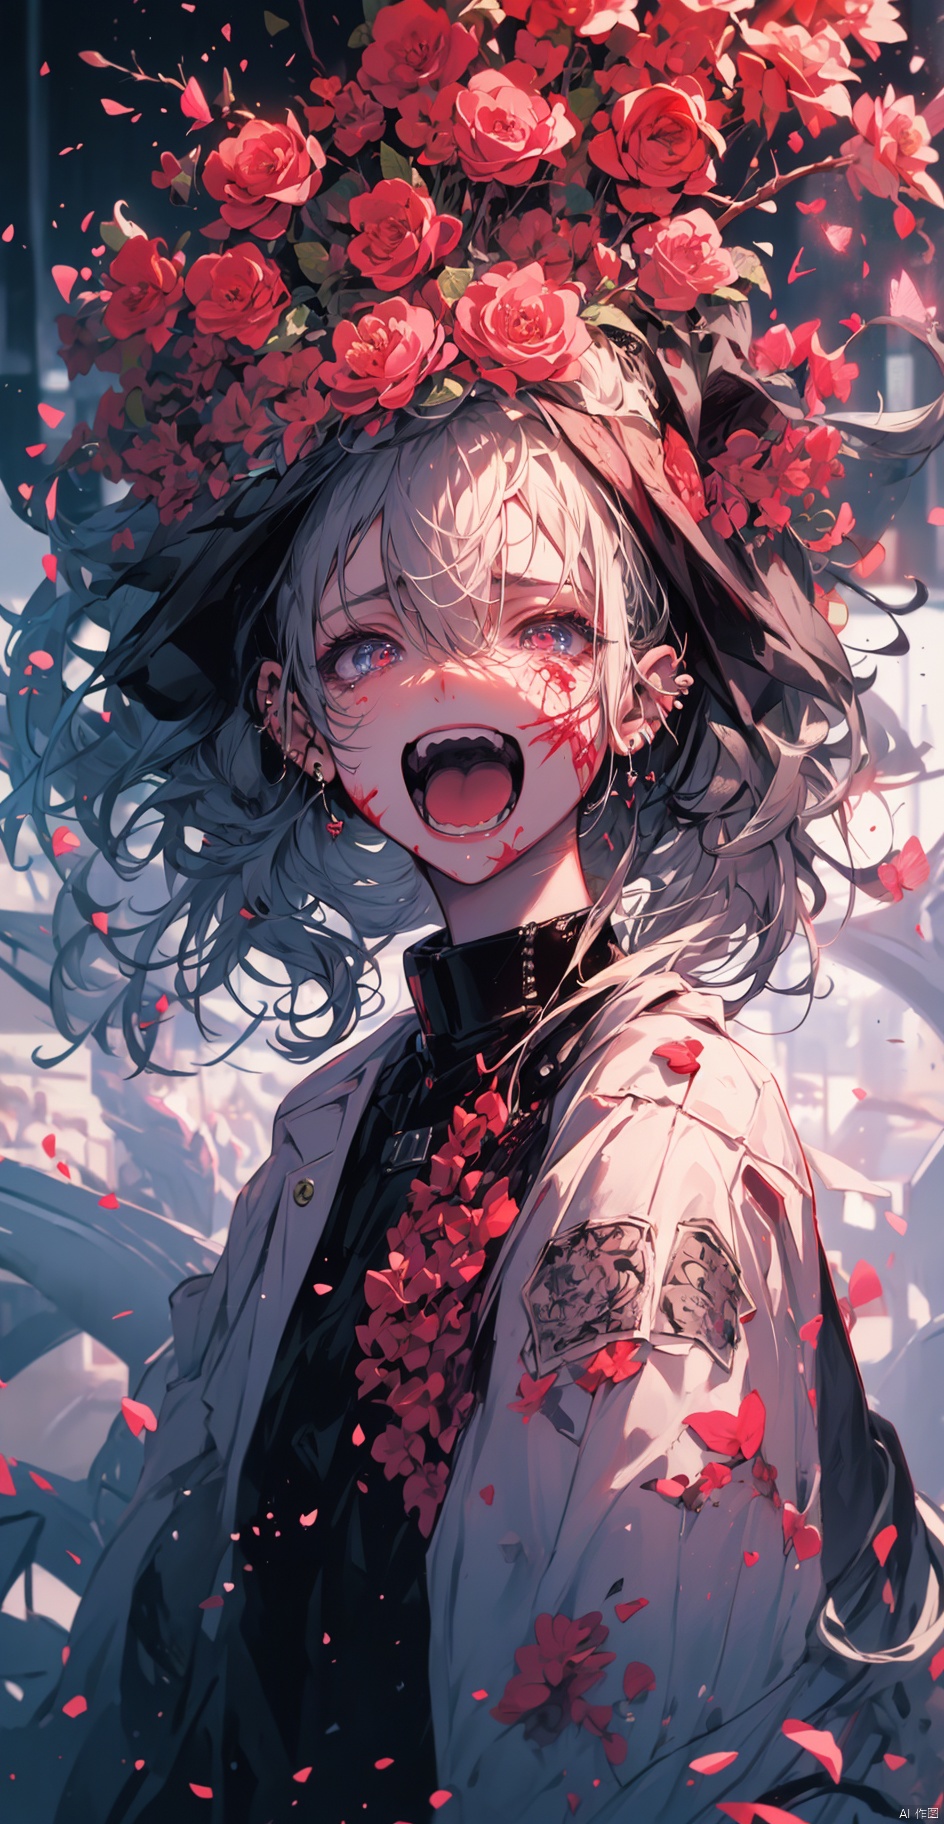  A girl, butterfly, dusk, falling flowers, cherry blossoms, ripples, water, blood, wounds, heart, Streamers, tears, laughte, myuejin, guijian, surrealistic, qsflh, Colorful portraits, fushihui, banhua, Ukiyoe, Rebellious girl, boom